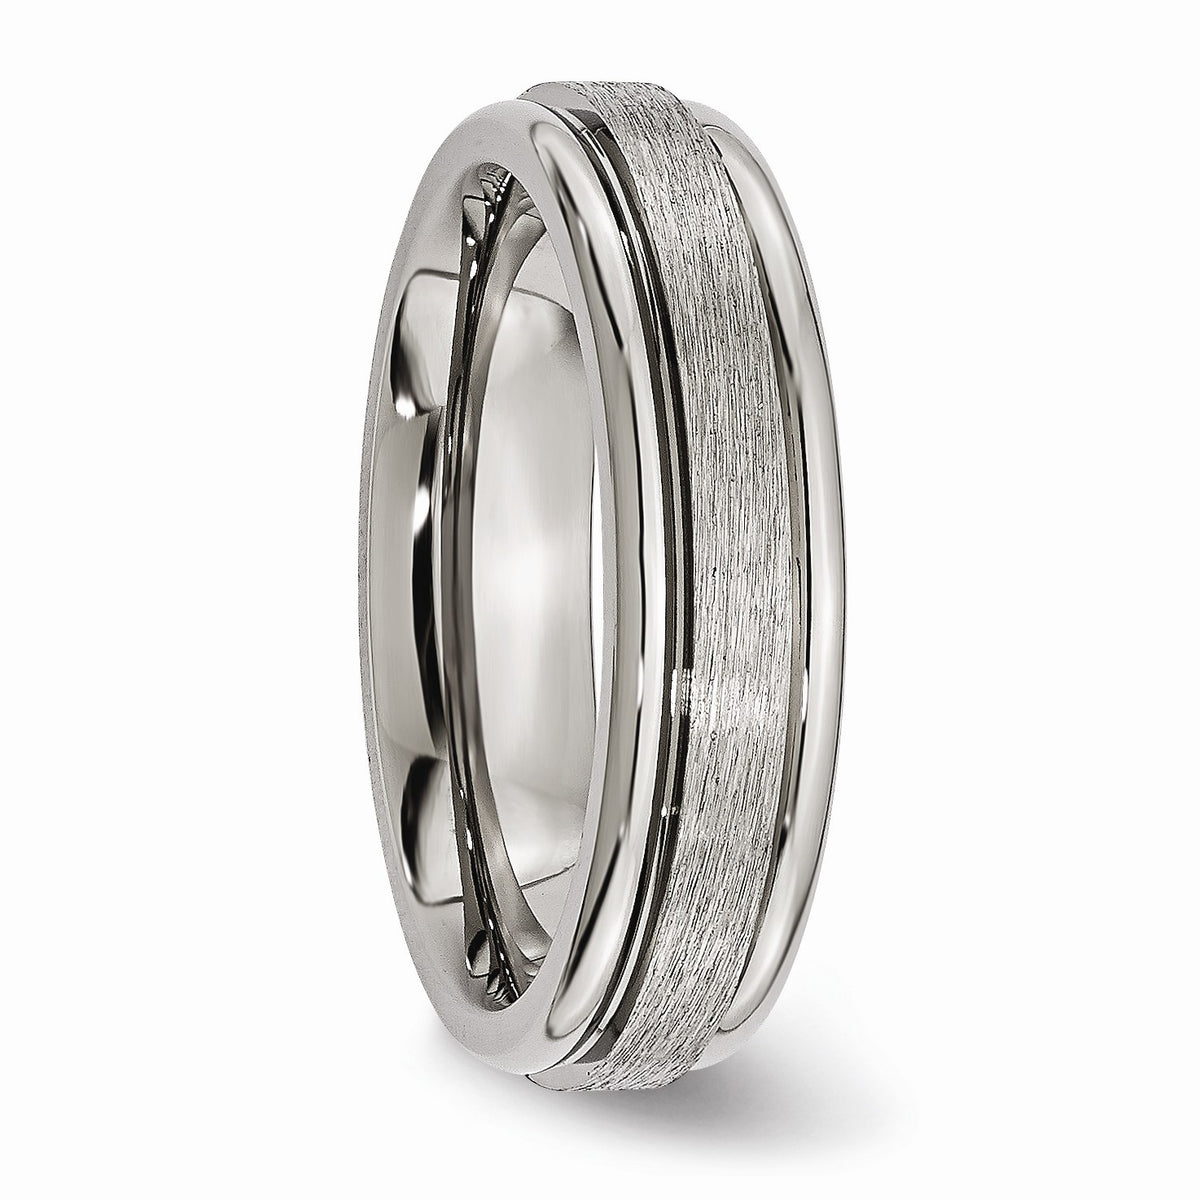 Alternate view of the Titanium, 6mm Grooved Edge Unisex Comfort Fit Band by The Black Bow Jewelry Co.